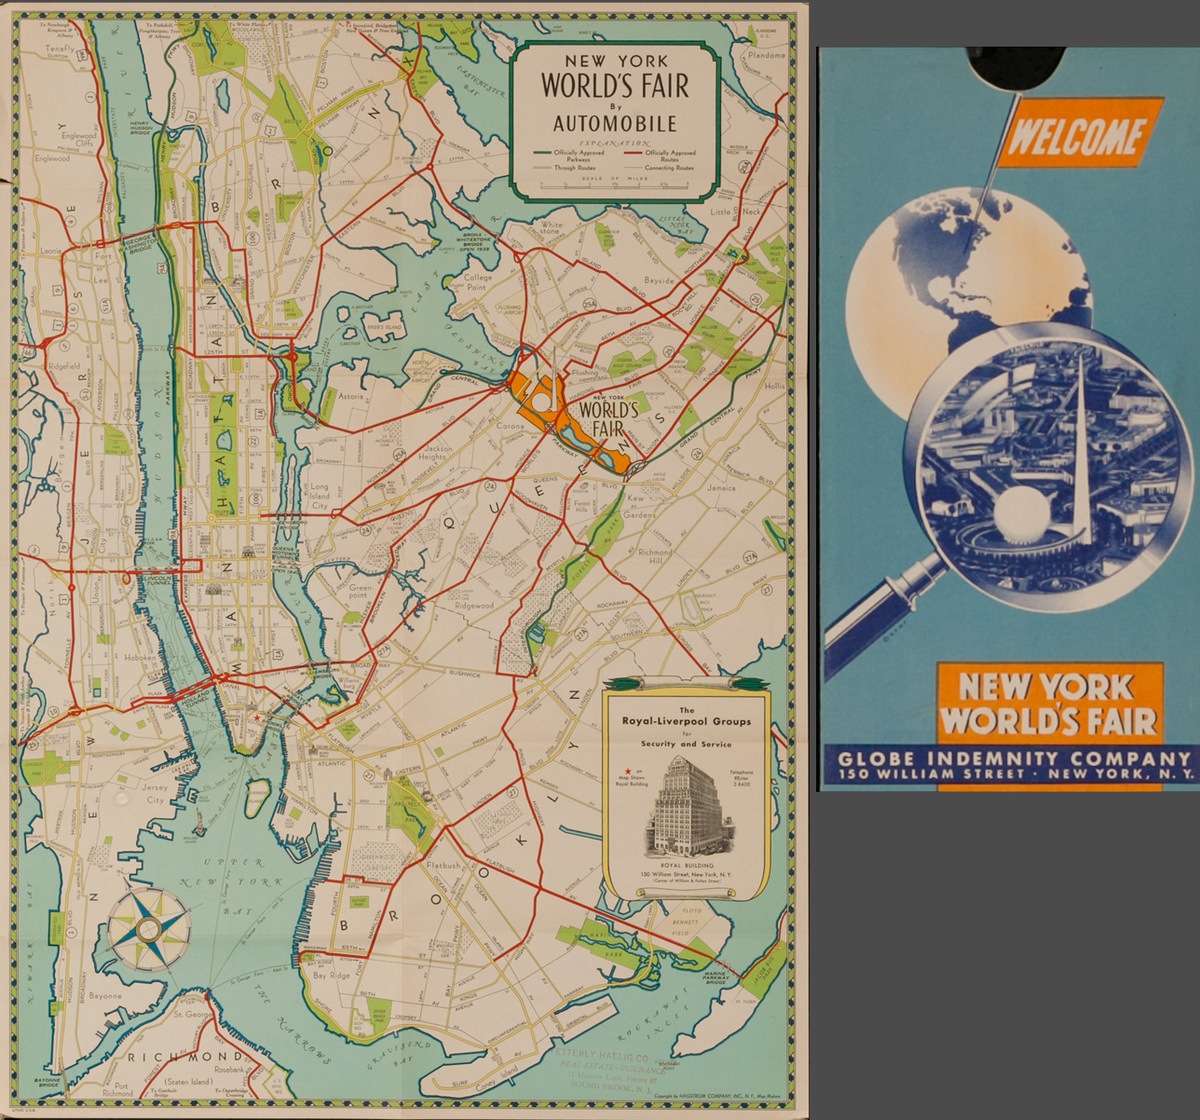 1939 New York World's Fair by Automobile Original Travel Map, Global Indemnity Company